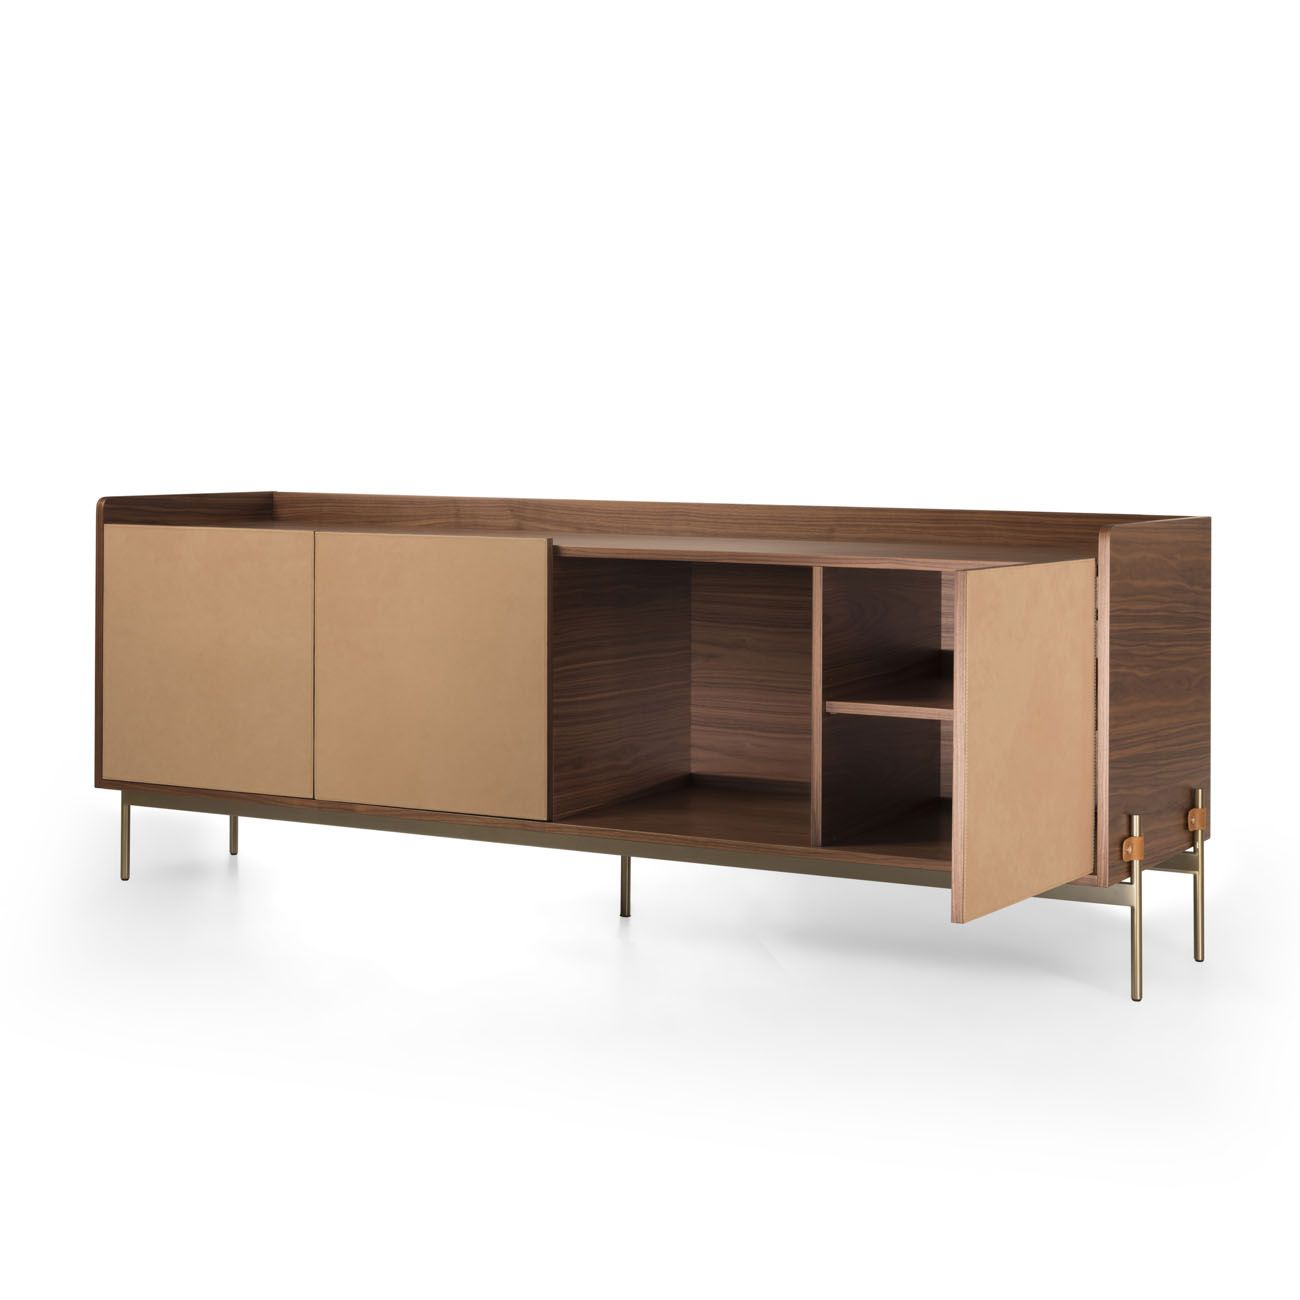 ASTON MARTIN HOME | V236 SIDEBOARD WITH DOORS $34,320.00